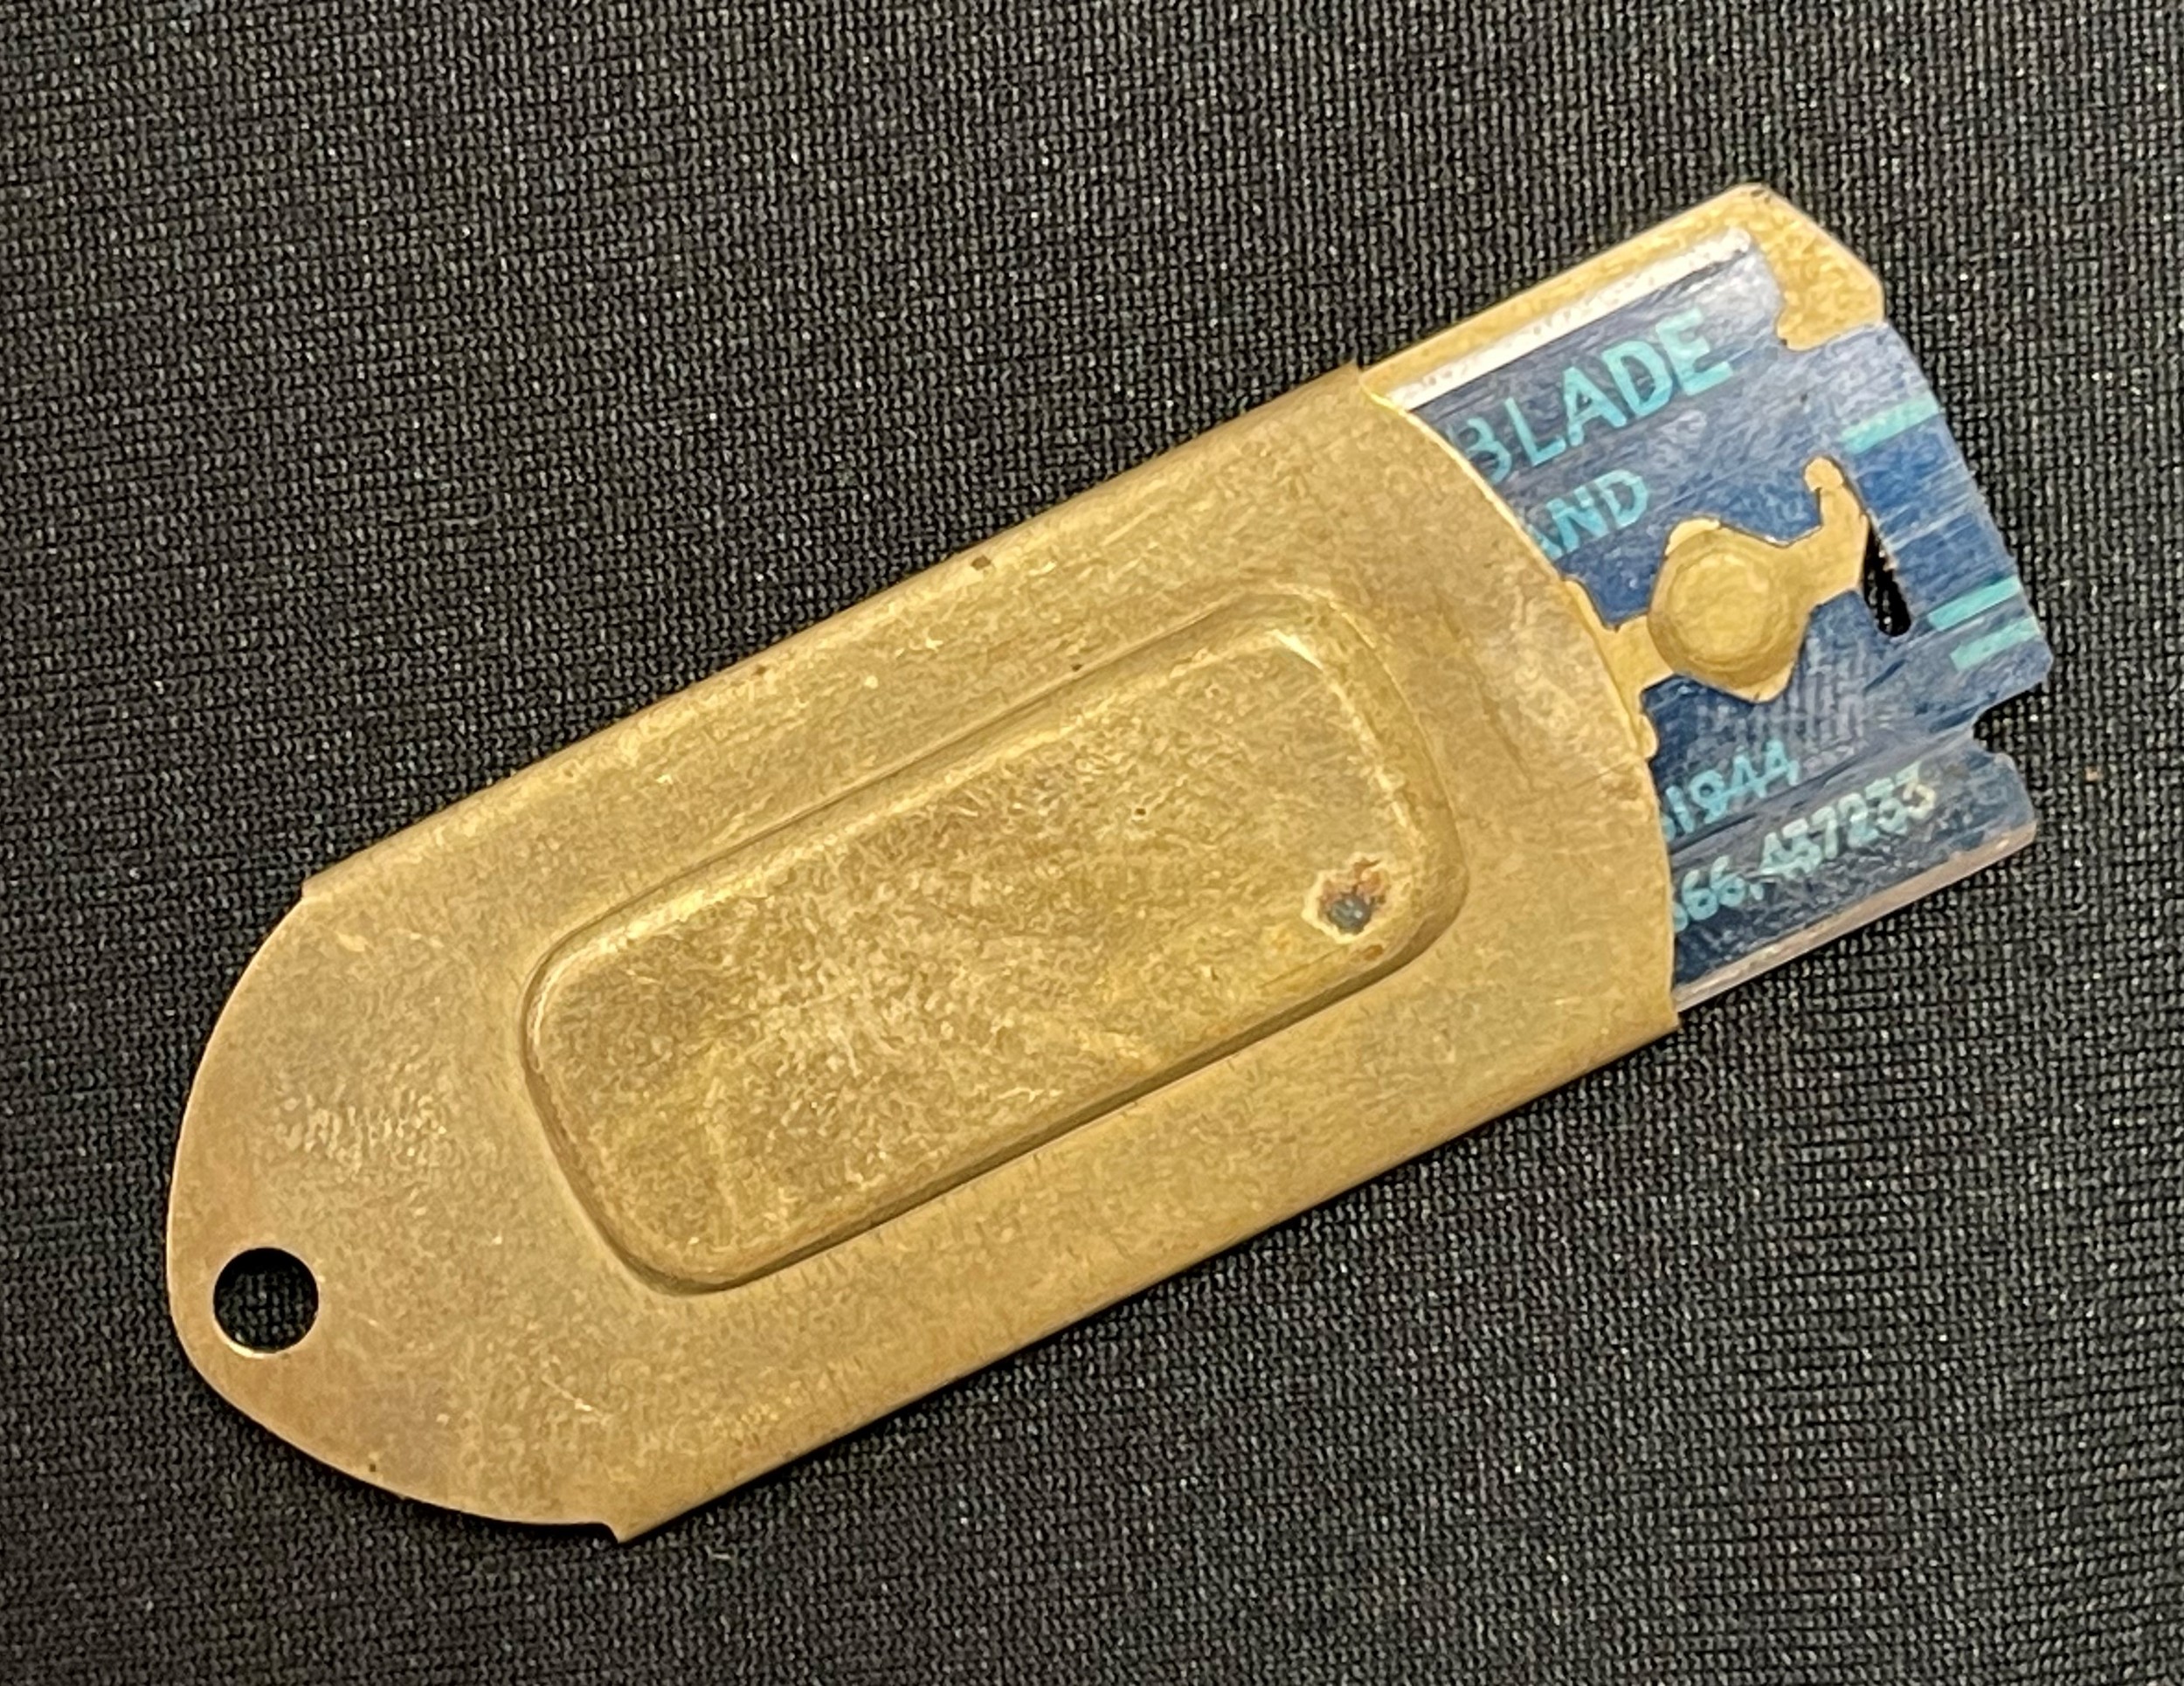 WW2 British / US "Visor Knife" escape and evasion blade, a brass scabbard designed to carry a - Image 2 of 3